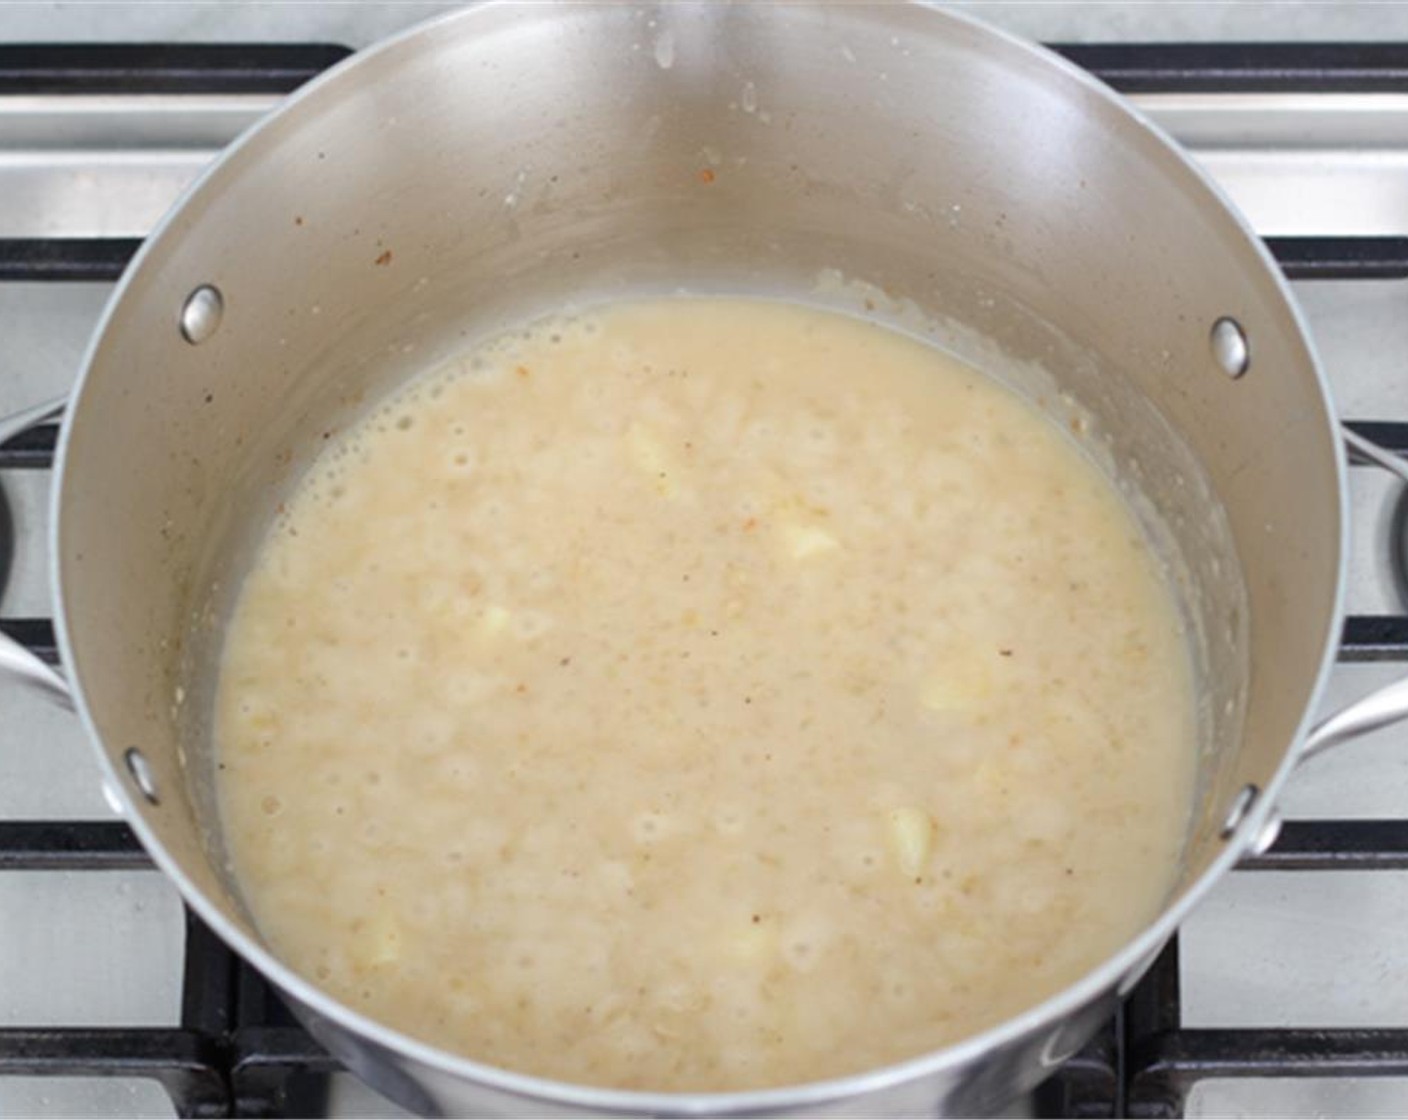 step 8 Pour in the Dry White Wine (1/2 cup) and the Chicken Broth (1 1/2 cups) gradually, whisking the liquid until the sauce is smooth. Bring to a boil and then reduce to a simmer. Pour in the Heavy Cream (1/2 cup).